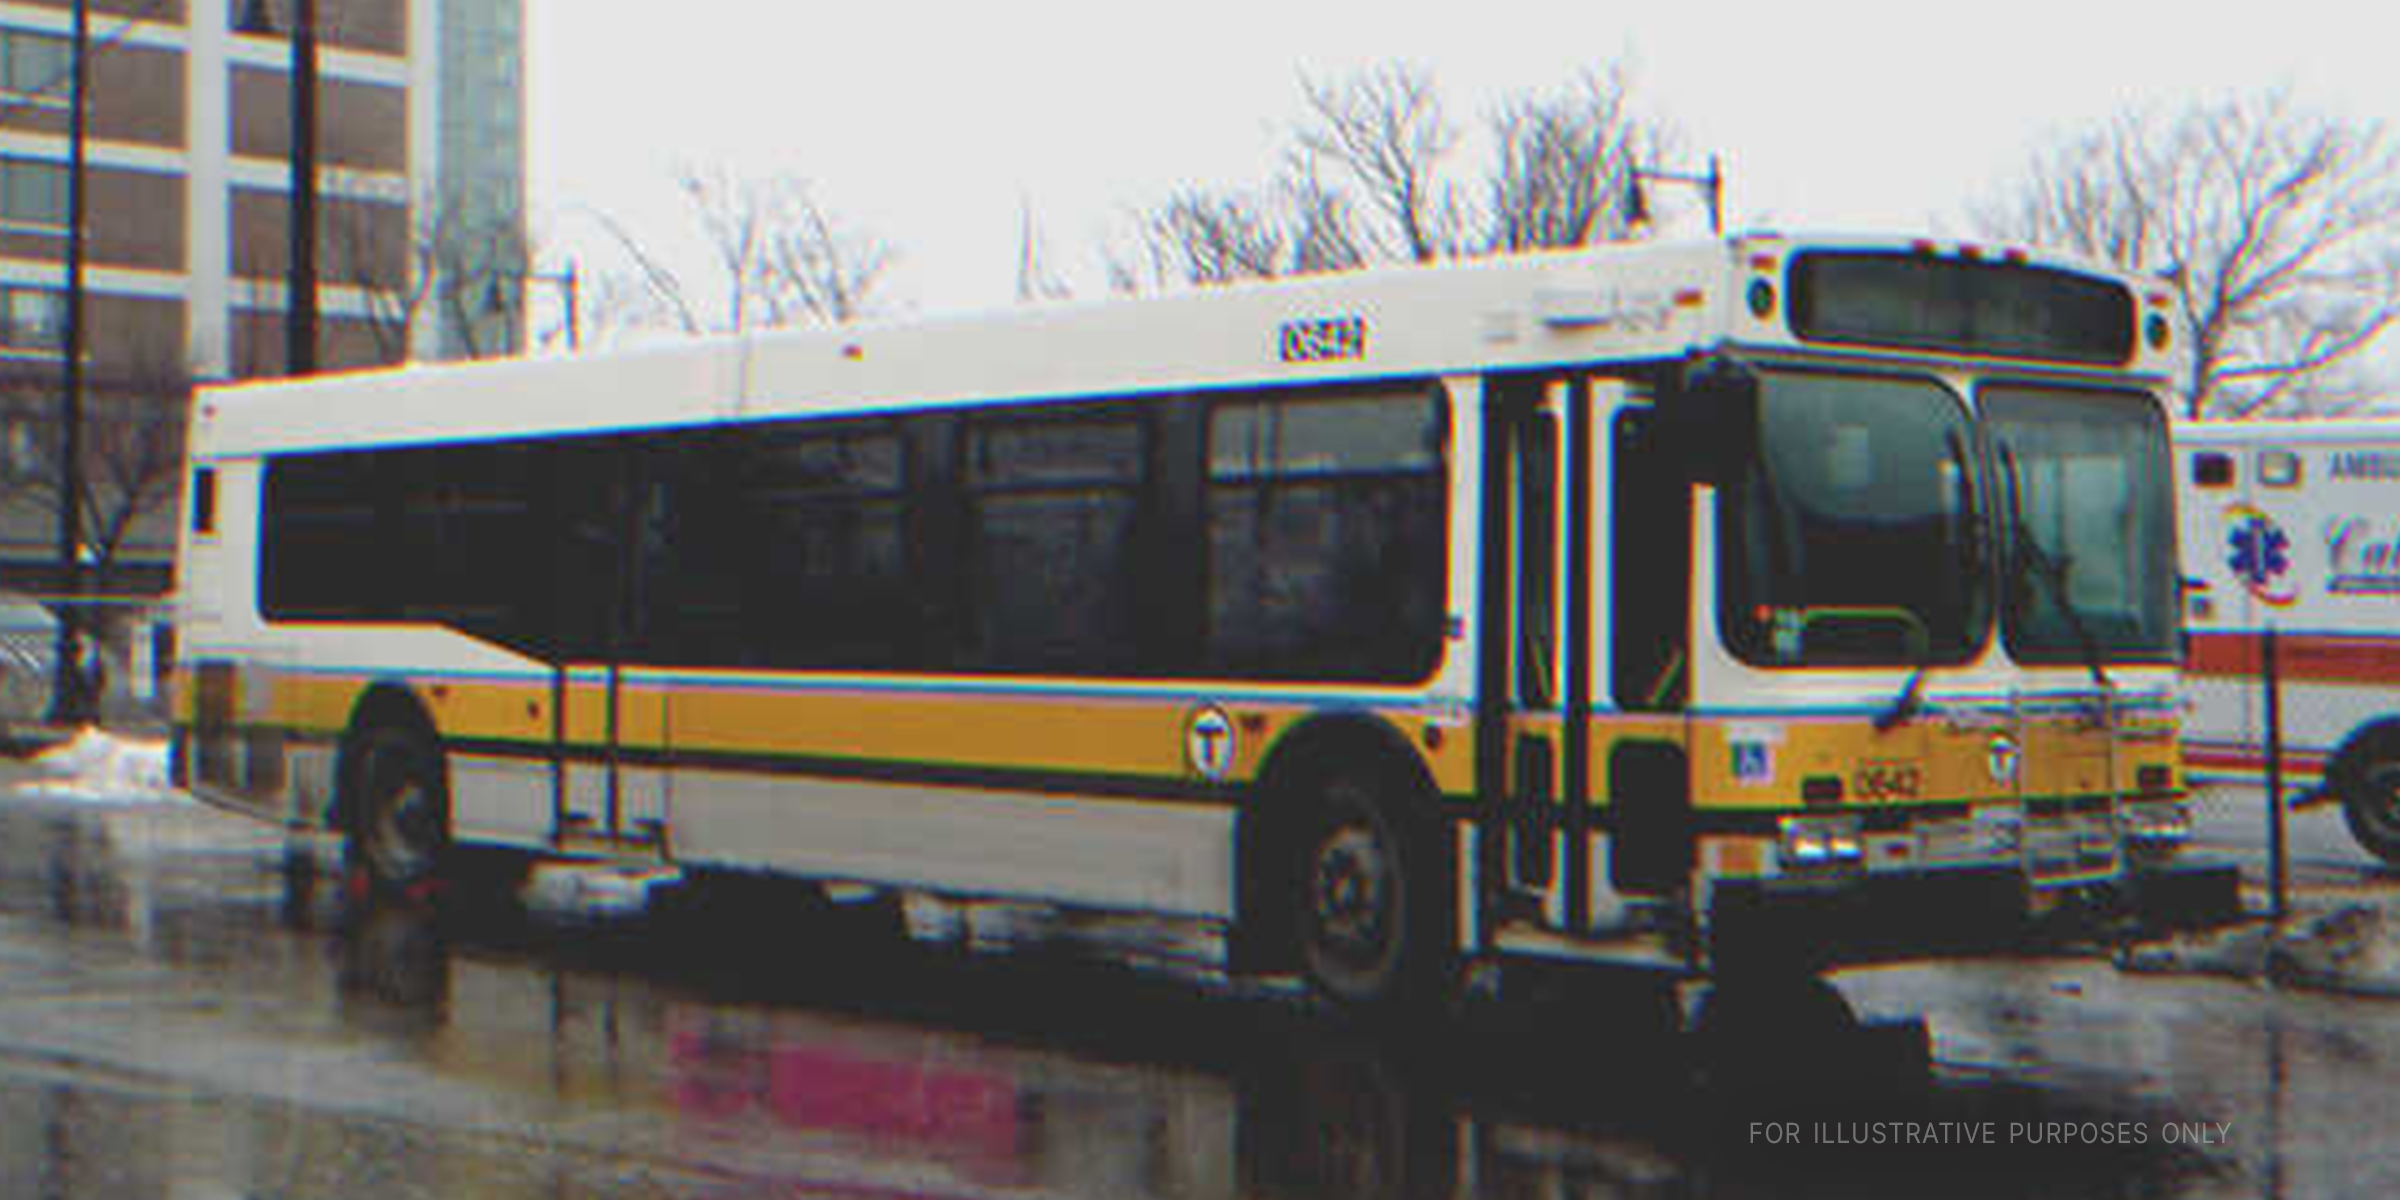 A bus. | Source: Flickr/JLaw45 (CC BY 2.0